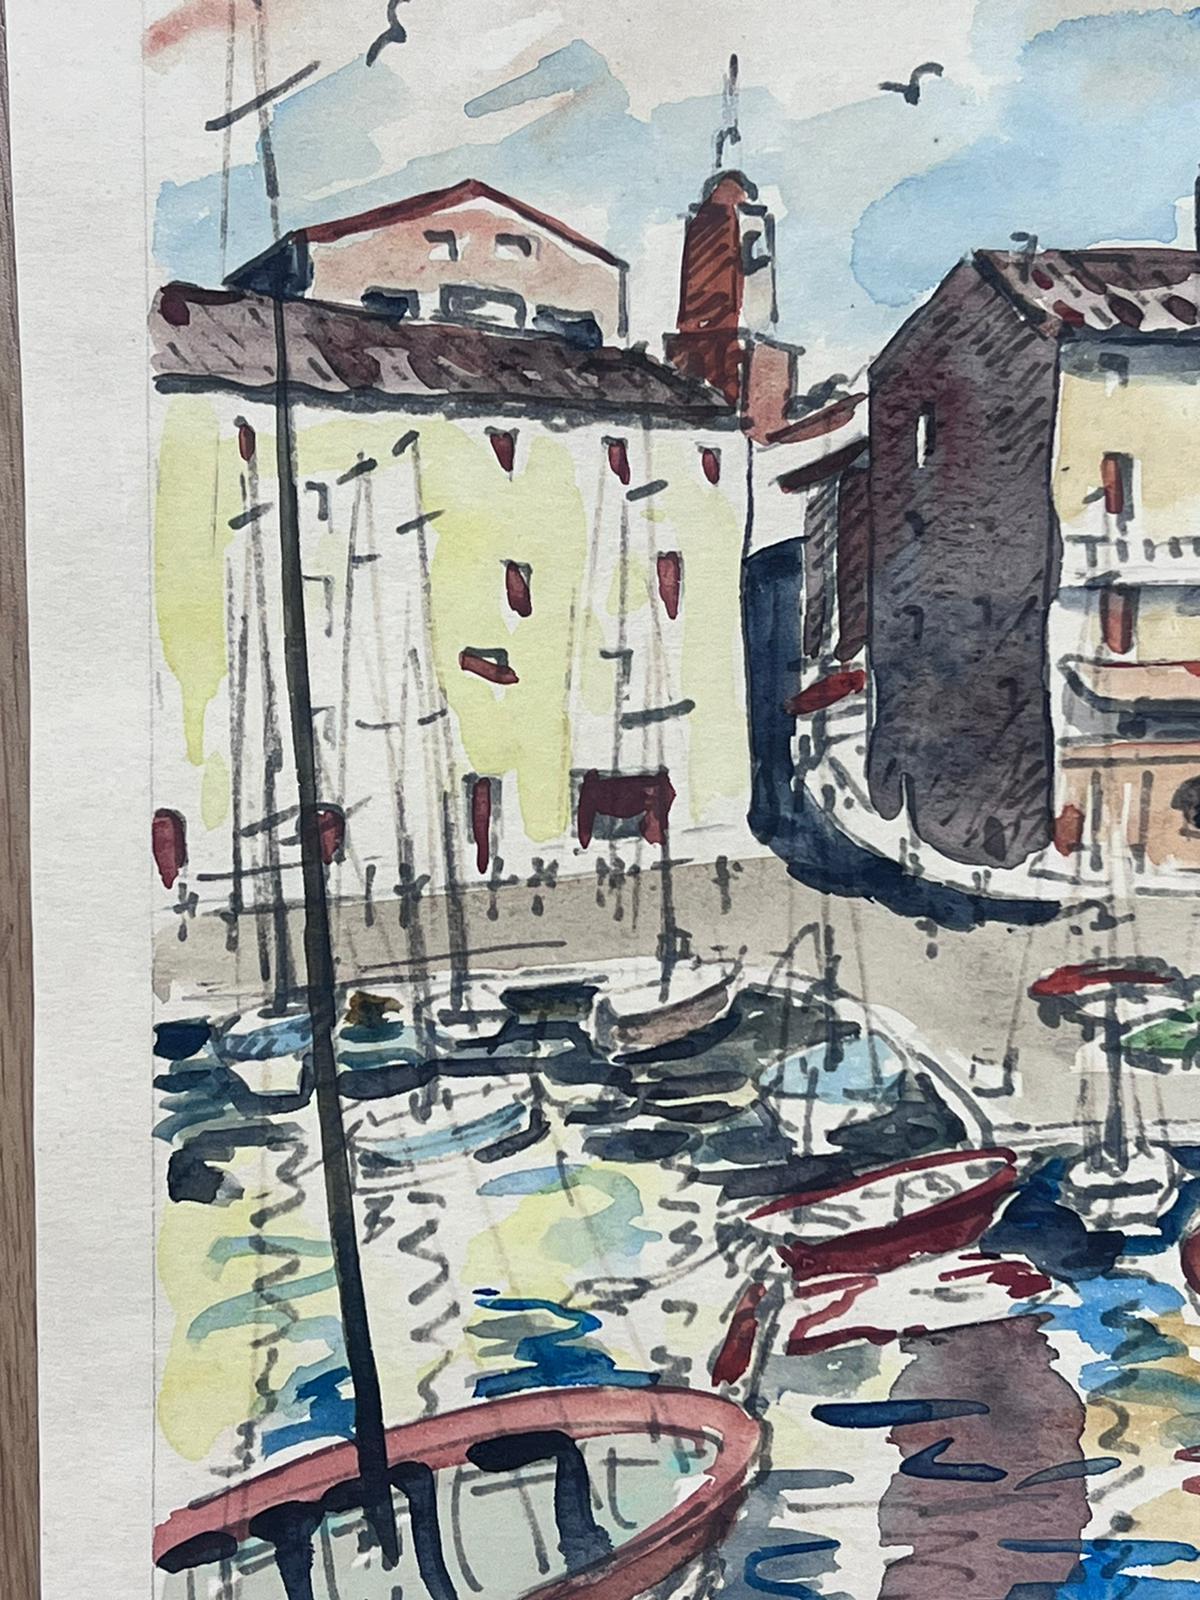 St Tropez Harbour 1960's Original French Watercolor Painting Signed & dated - Impressionist Art by French School